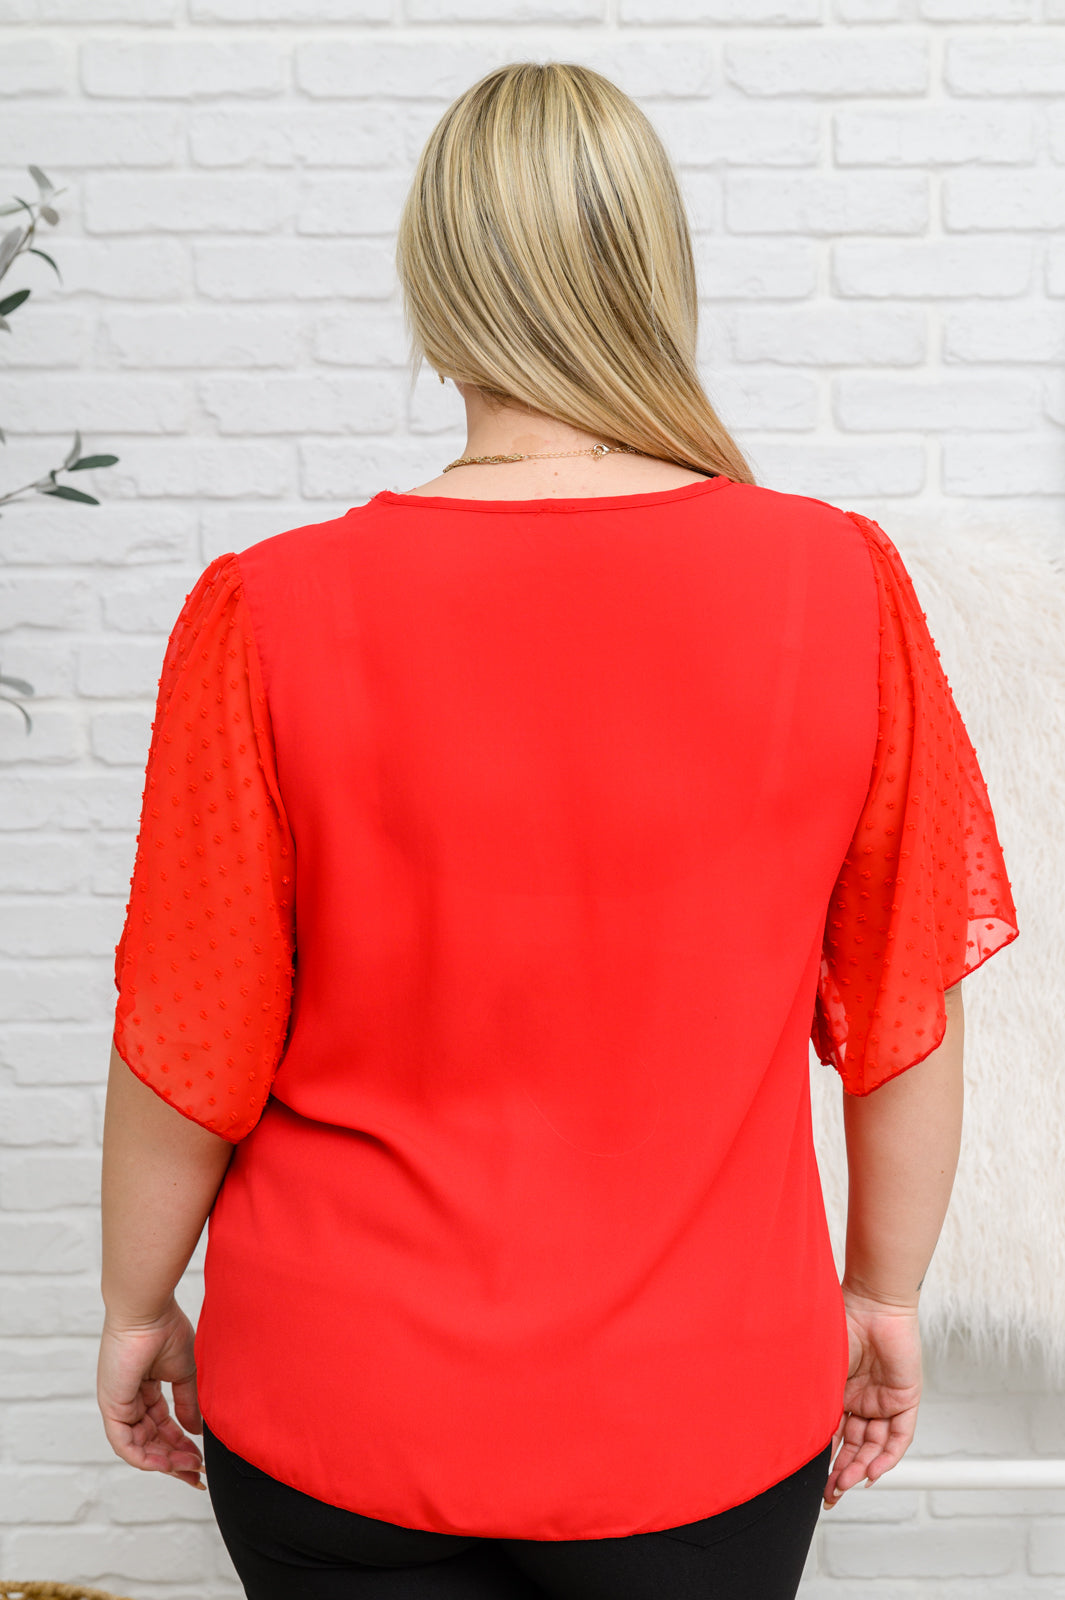 Best Of My Love Short Sleeve Blouse In Red - The GlamBox Jewels Boutique